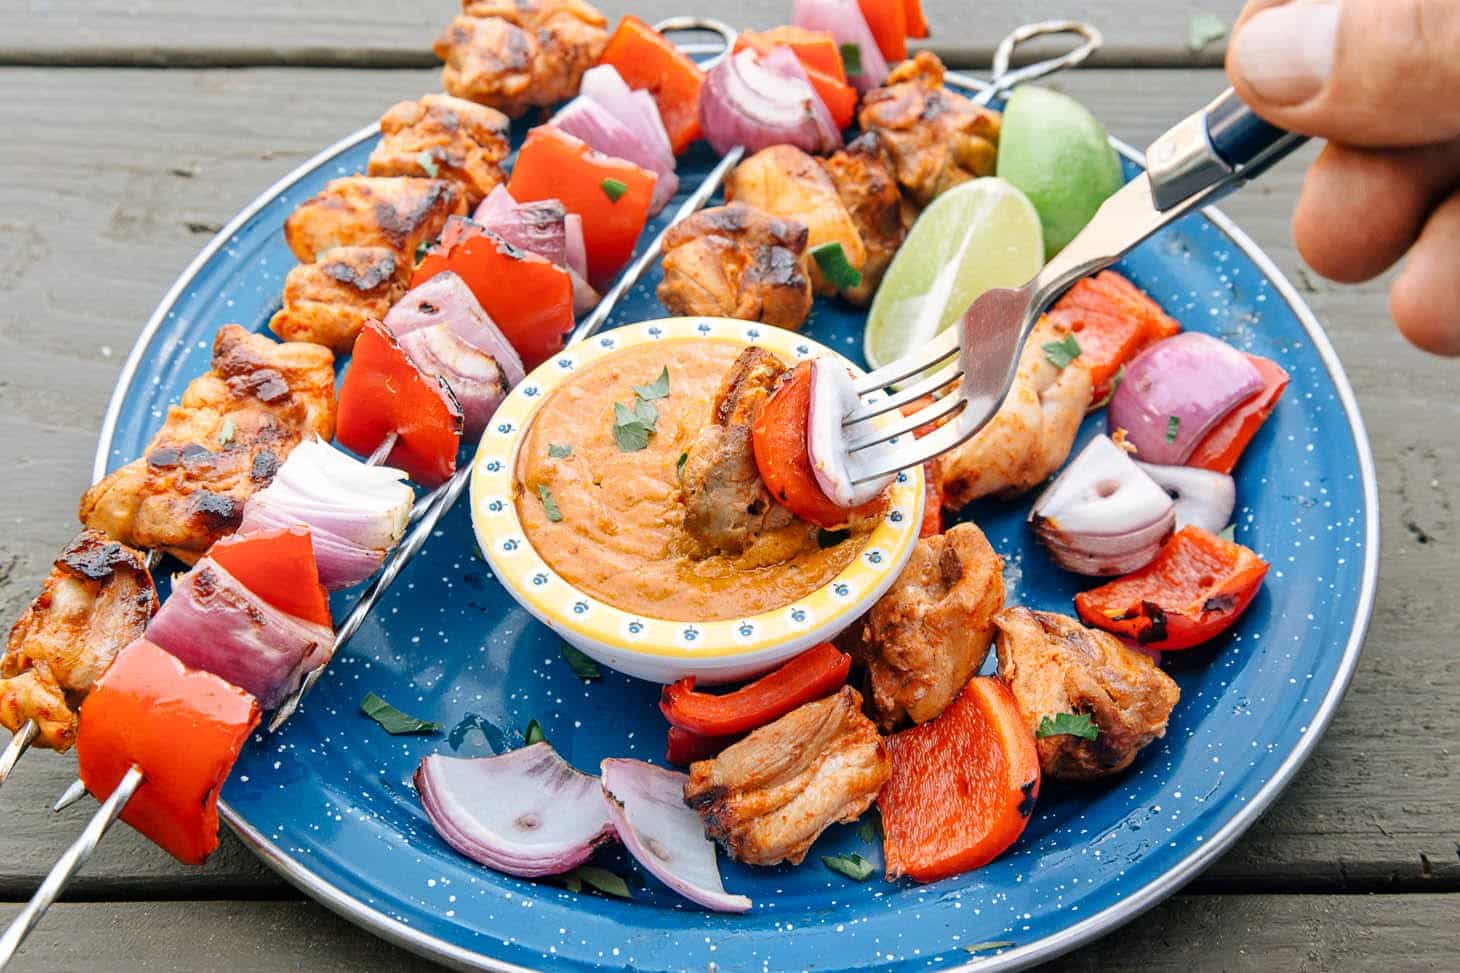 These satay-inspired Thai Grilled Chicken Skewers are perfect for cooking right on the campfire.